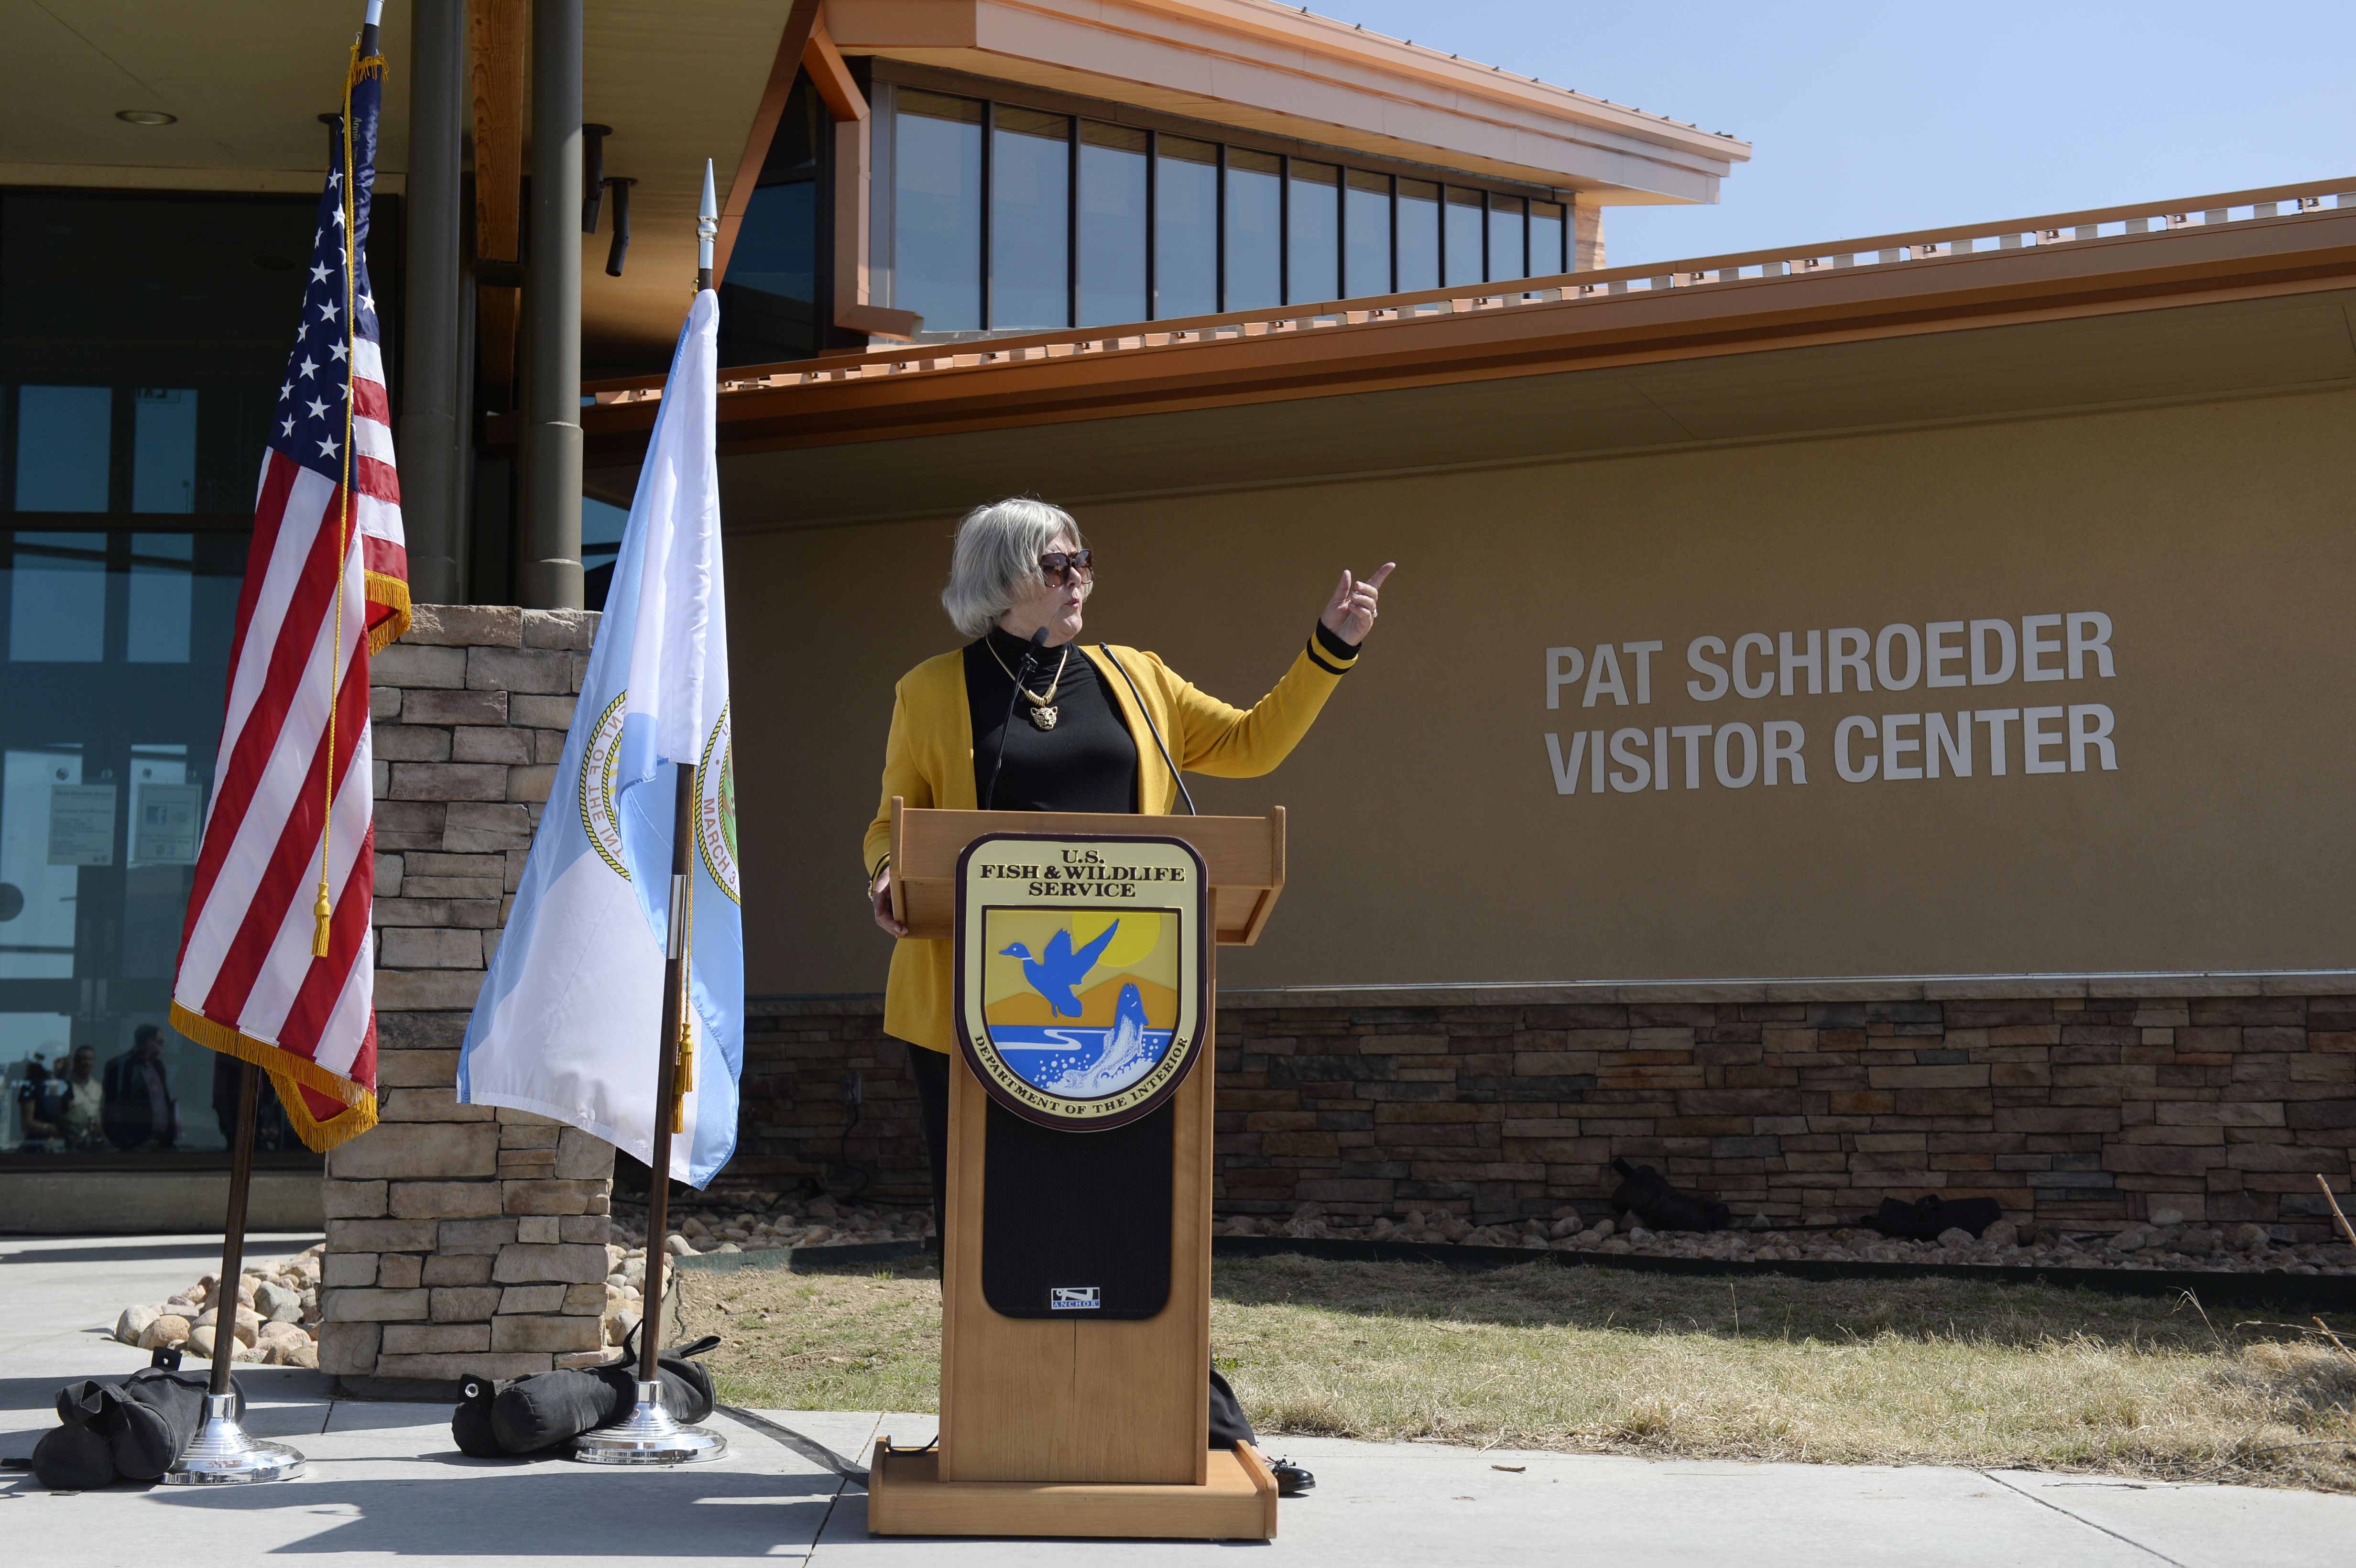 COMMERCE CITY, CO - APRIL 08: Former Congresswoman Pat Schroeder speaks at the Rocky Mountain Arsenal National Wildlife Refuge Visitor Center April 08, 2015. U.S. Representatives Diana DeGette, Ed Perlmutter, Jared Polis and other dignitaries were on hand for the naming ceremony in honor of Pat Schroeder. (Photo by Andy Cross/The Denver Post via Getty Images)